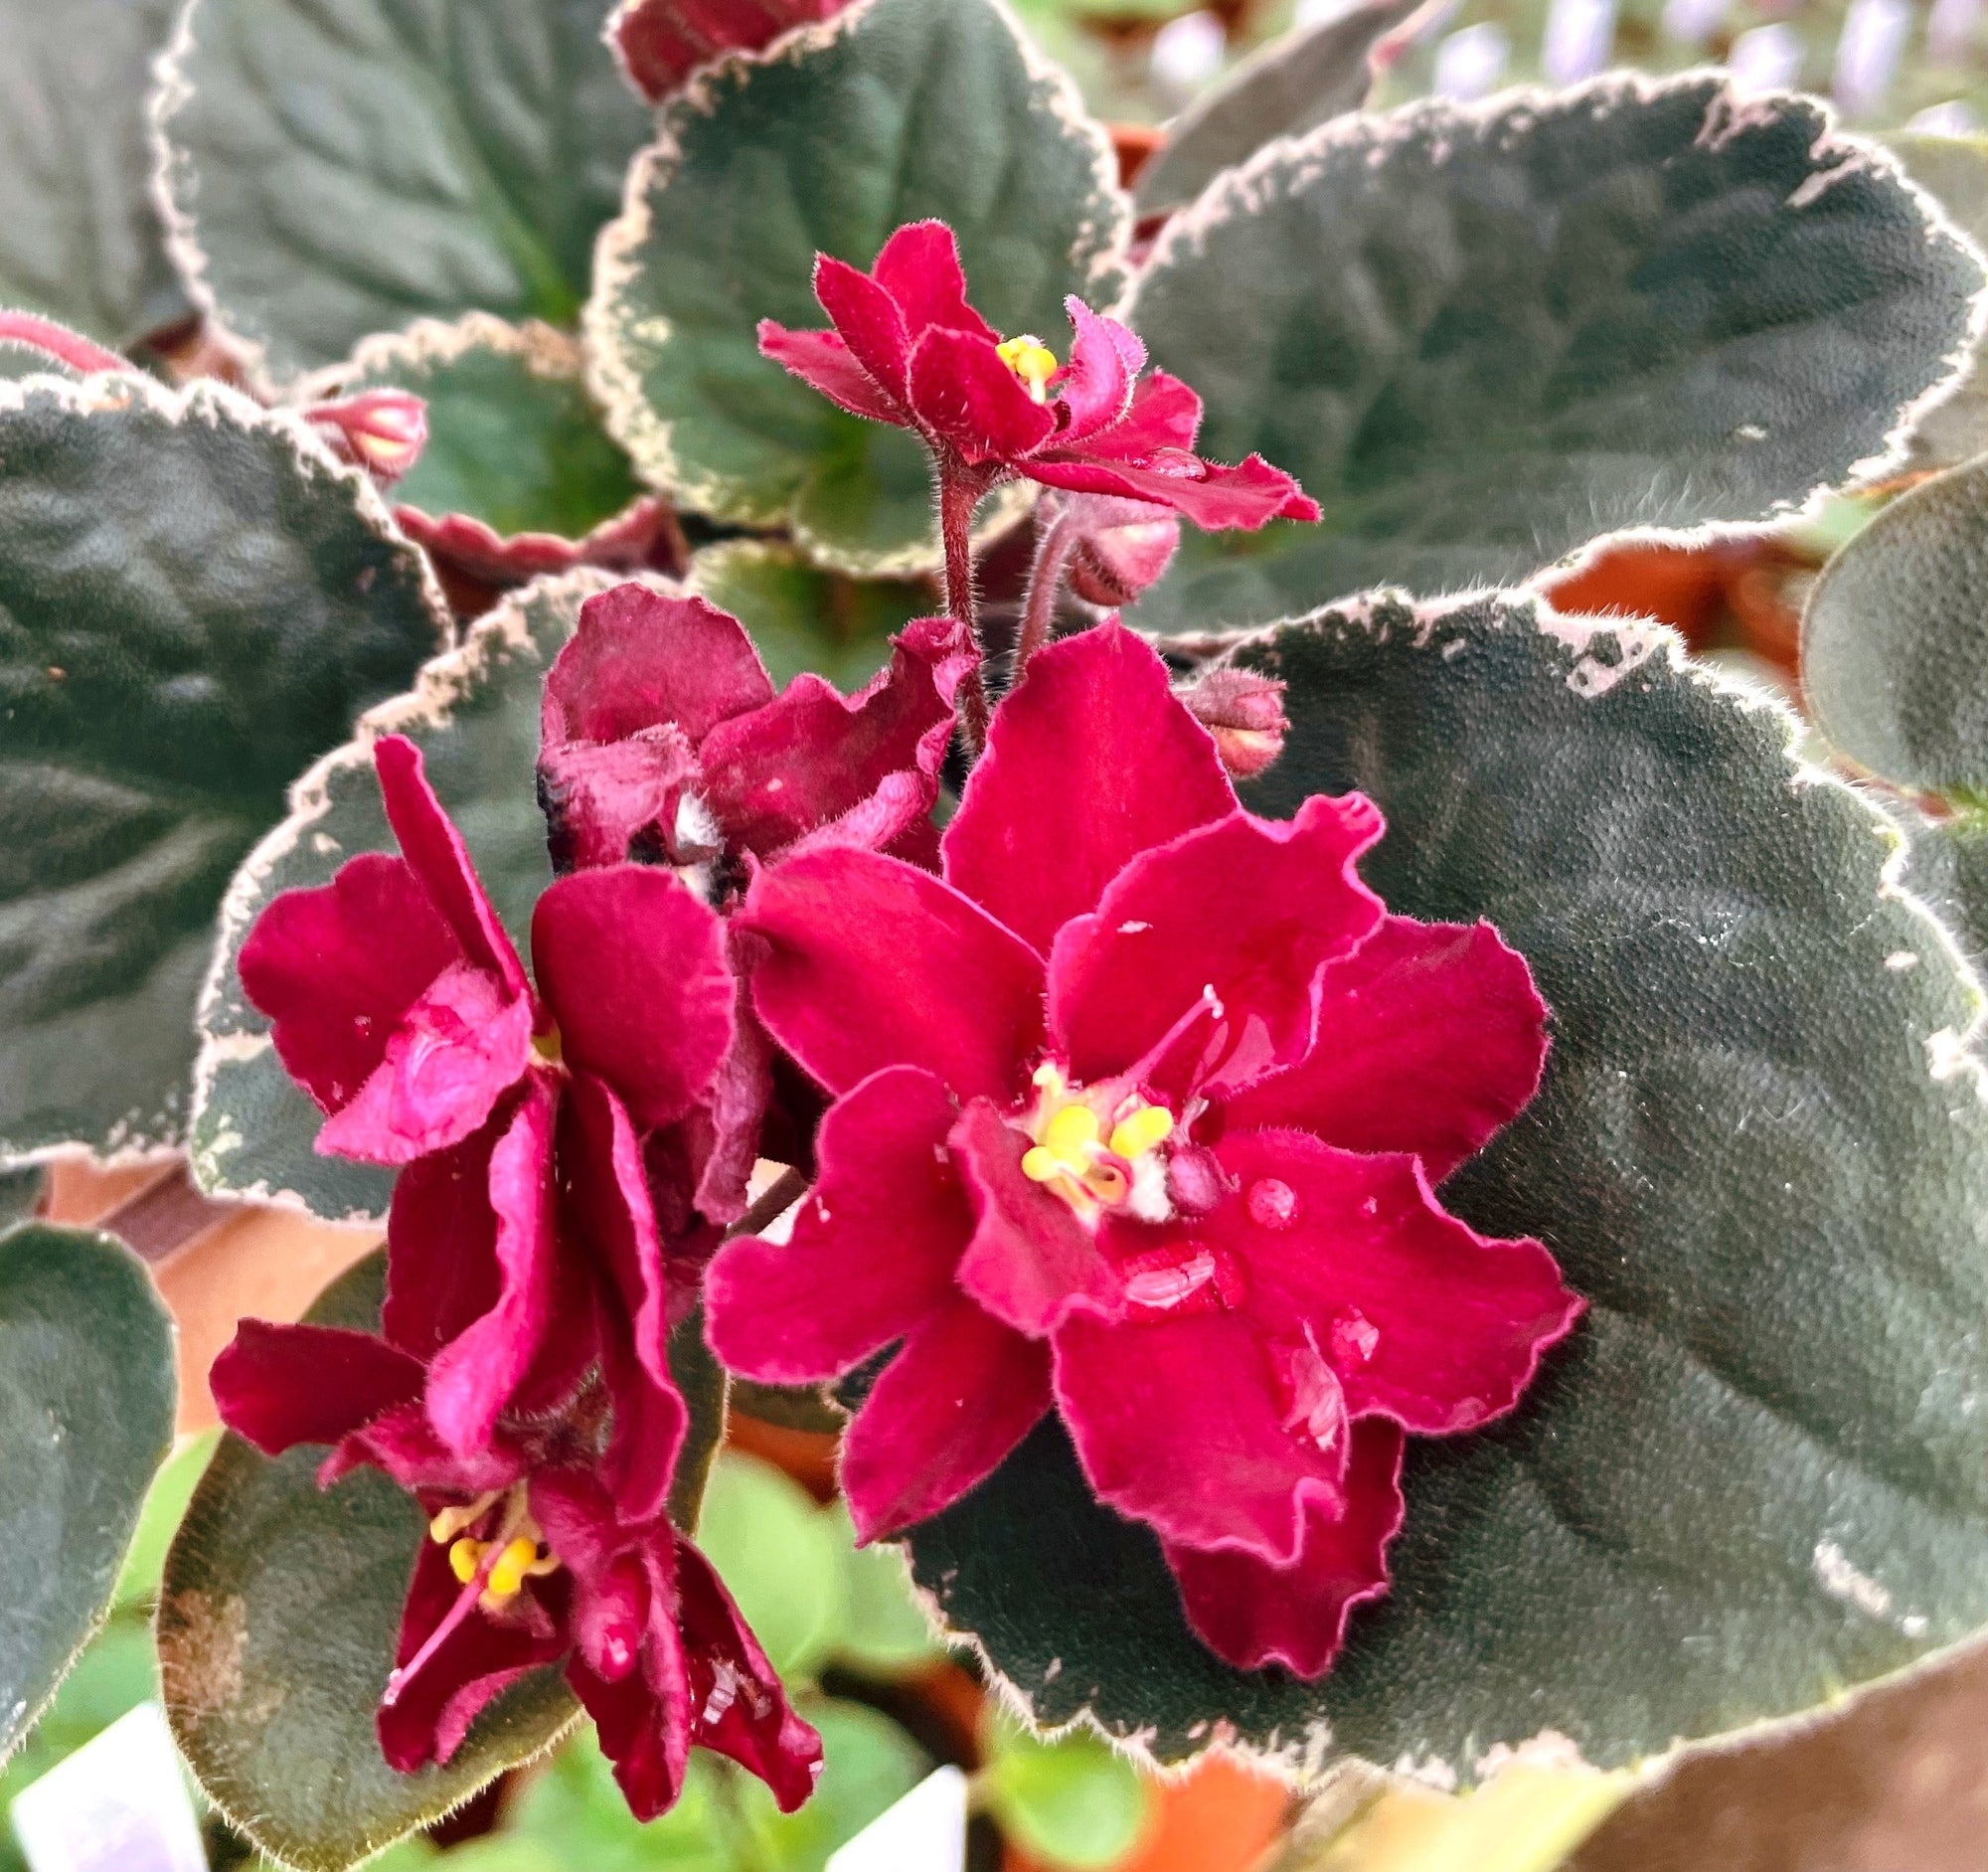 Live house plant bloom Red African Violet Harmonys Mas Stewed Tomato garden 4 pot flower Potted gift